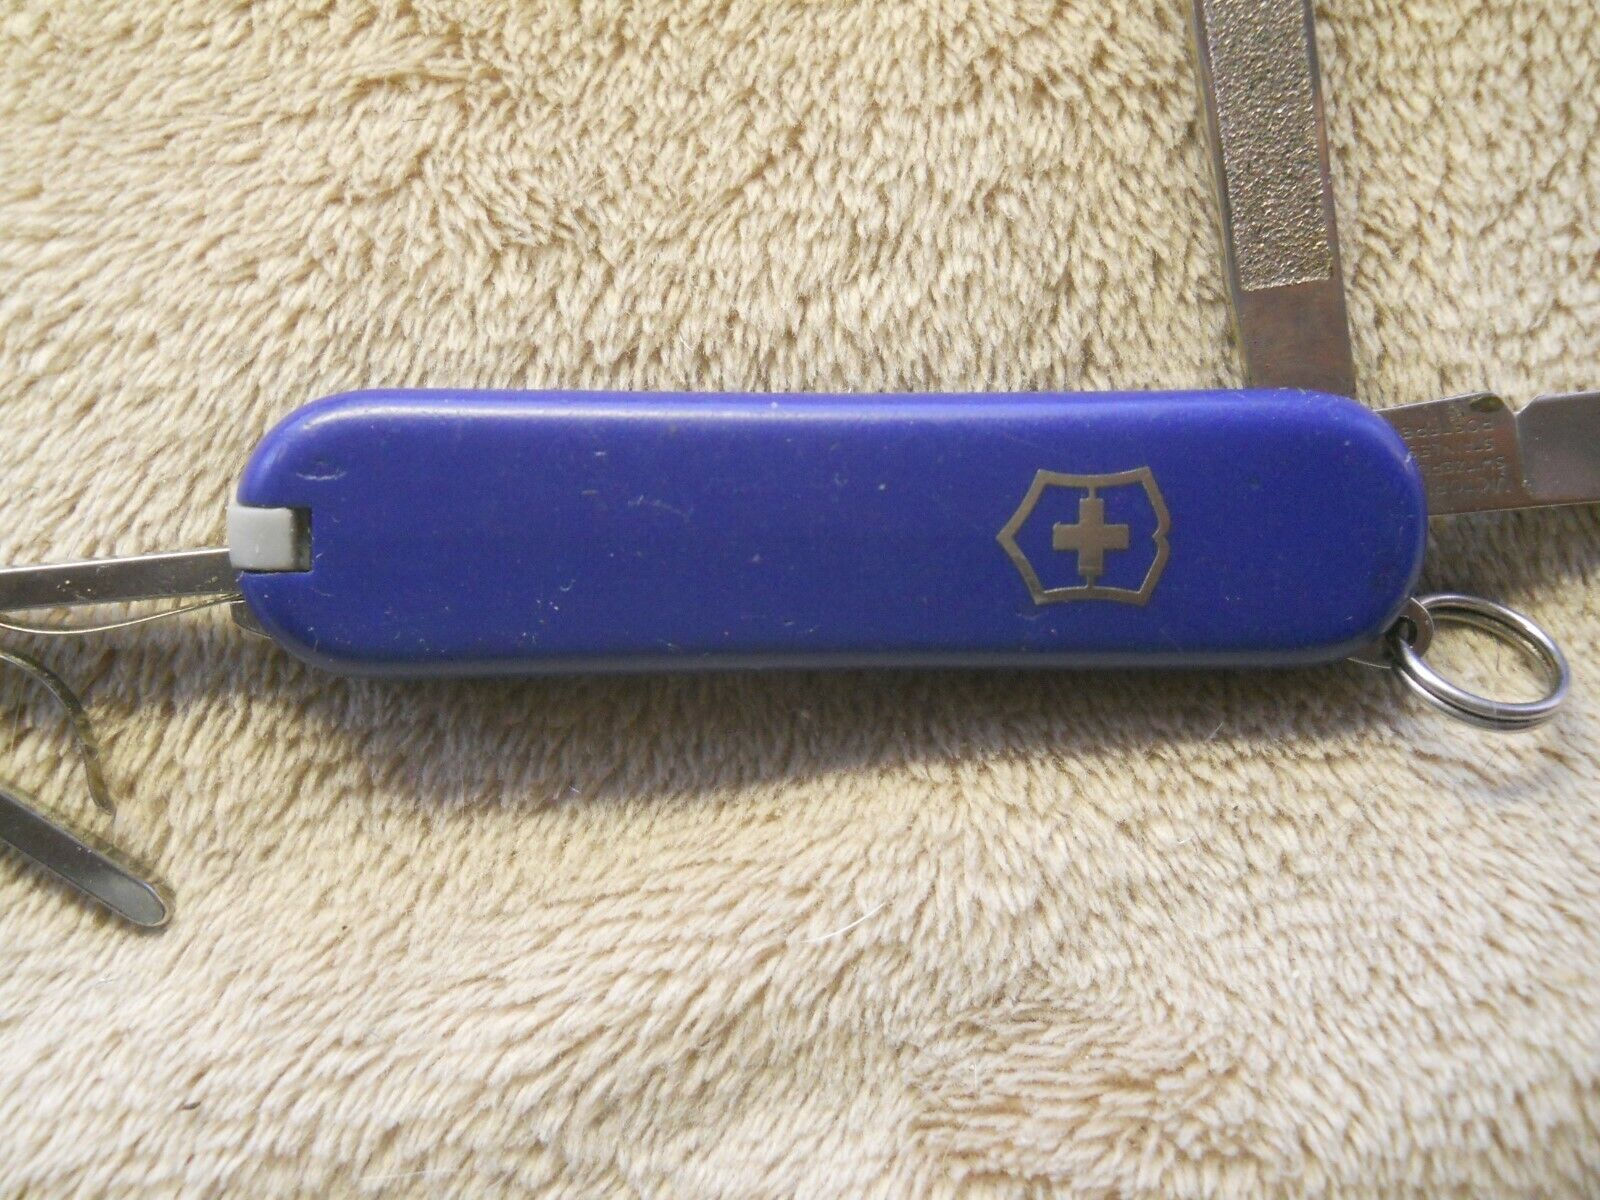 Primary image for Victorinox Classic SD Swiss Army knife in blue